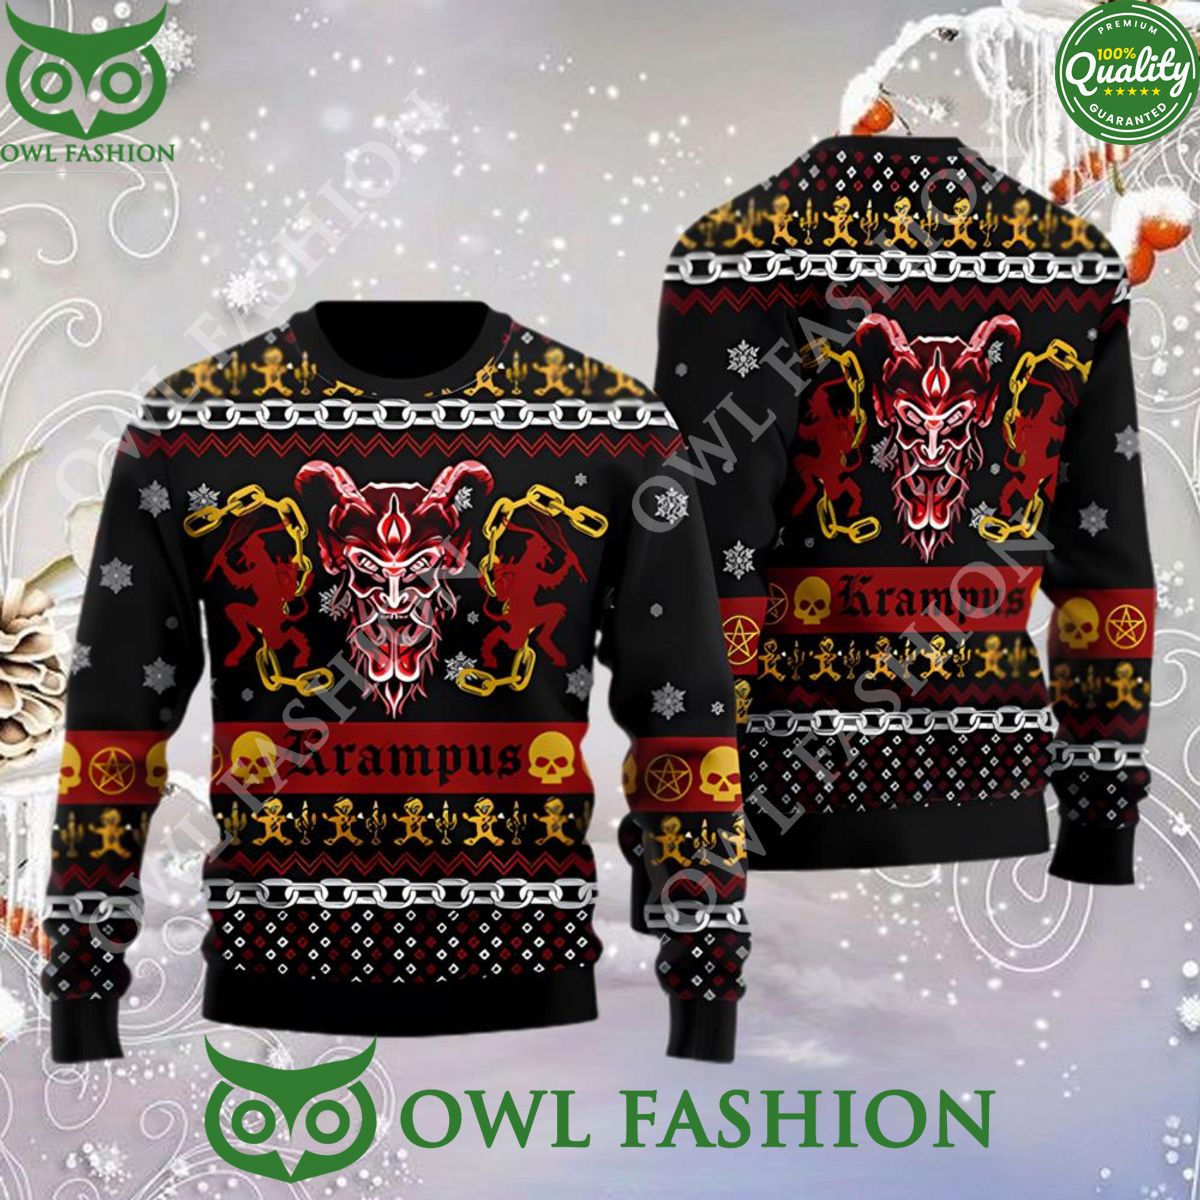 Krampus Horror Ugly Christmas Sweater Jumpers Pic of the century